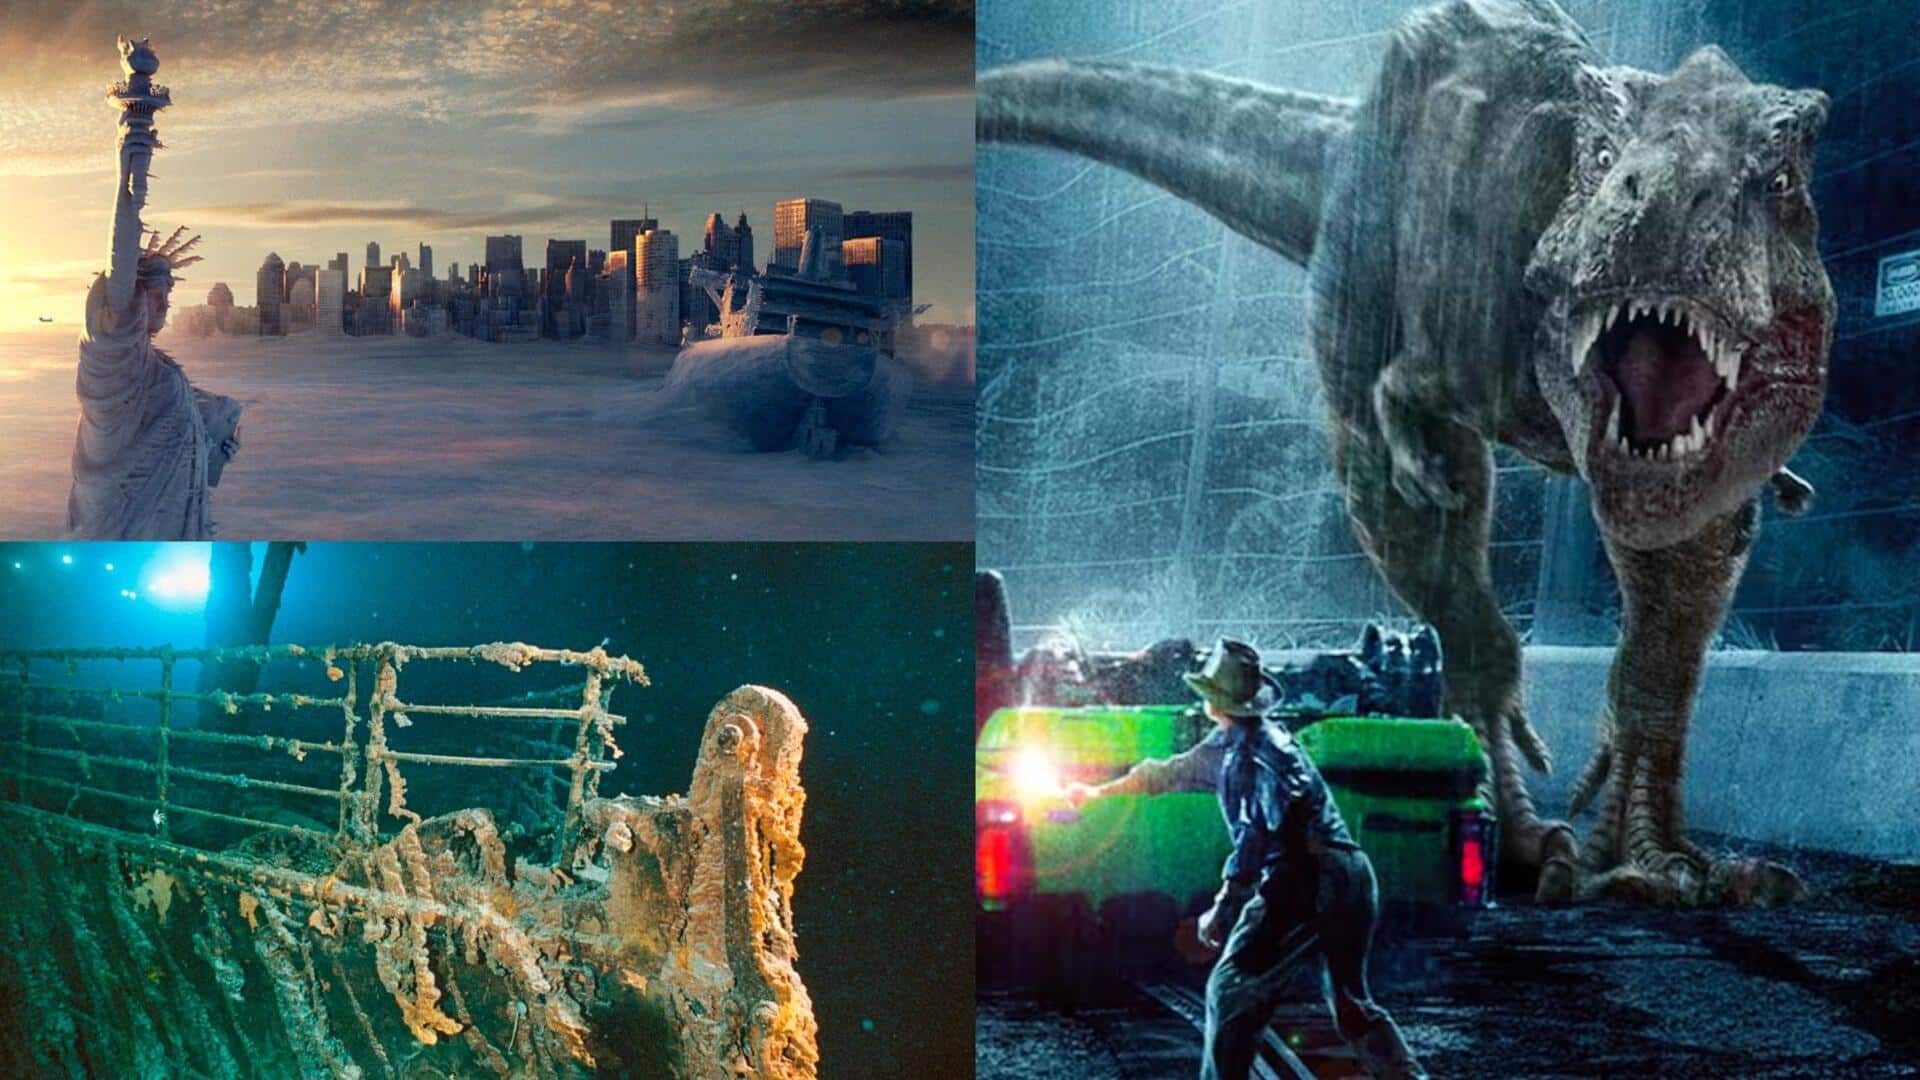 'Titanic' to 'Contagion': Hollywood's top 5 epic disaster films